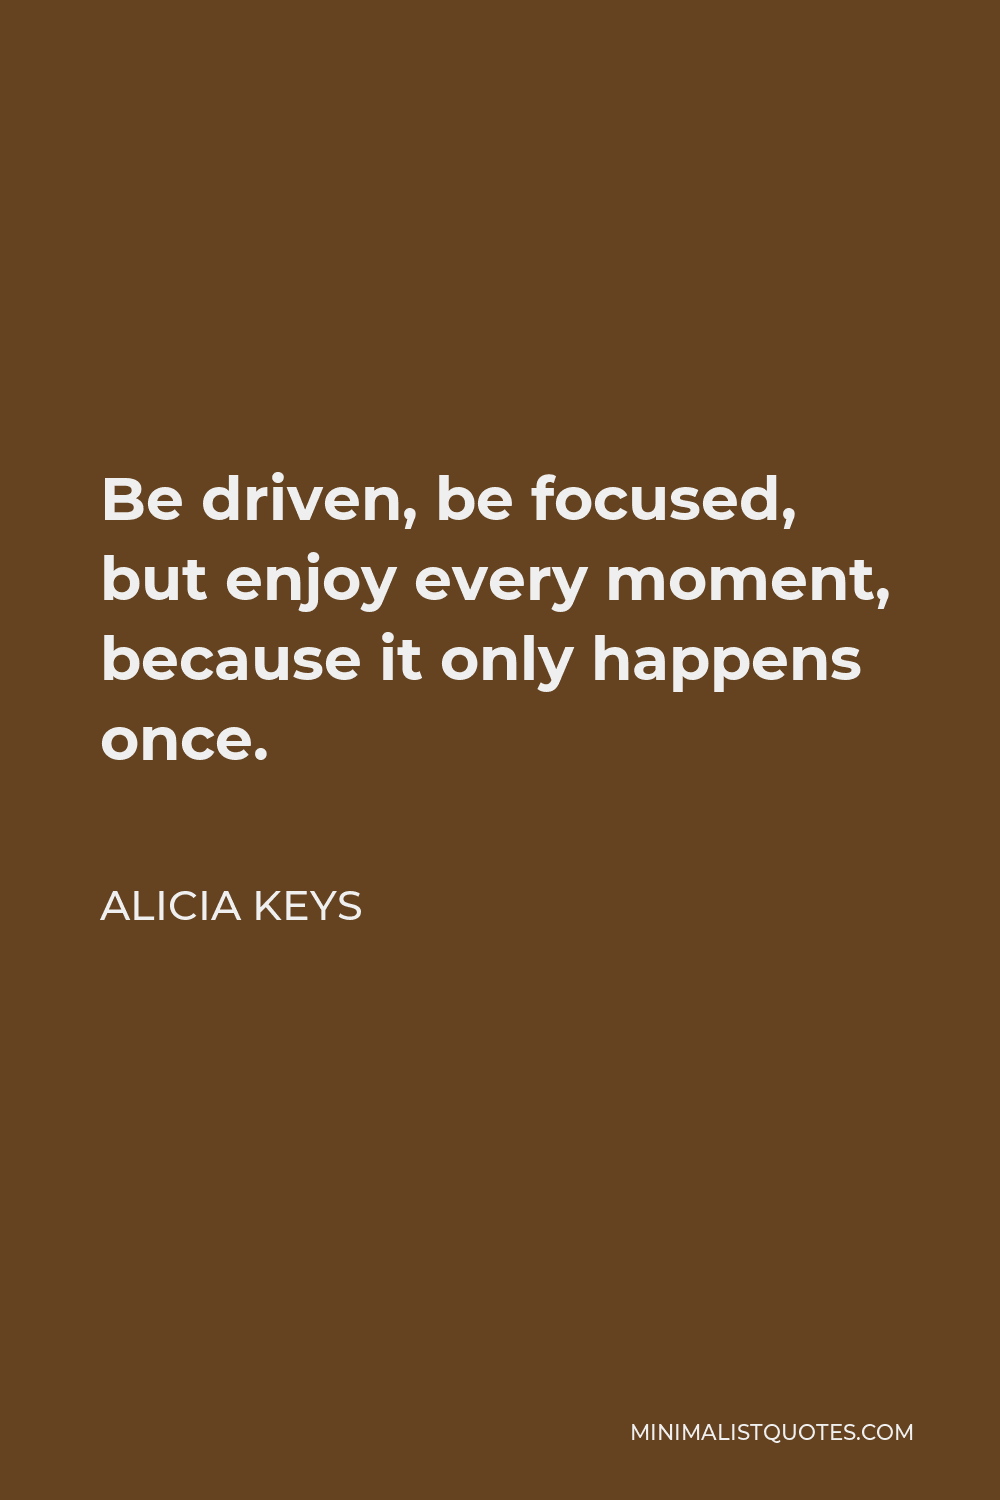 Alicia Keys Quote - Be driven, be focused, but enjoy every moment, because it only happens once.